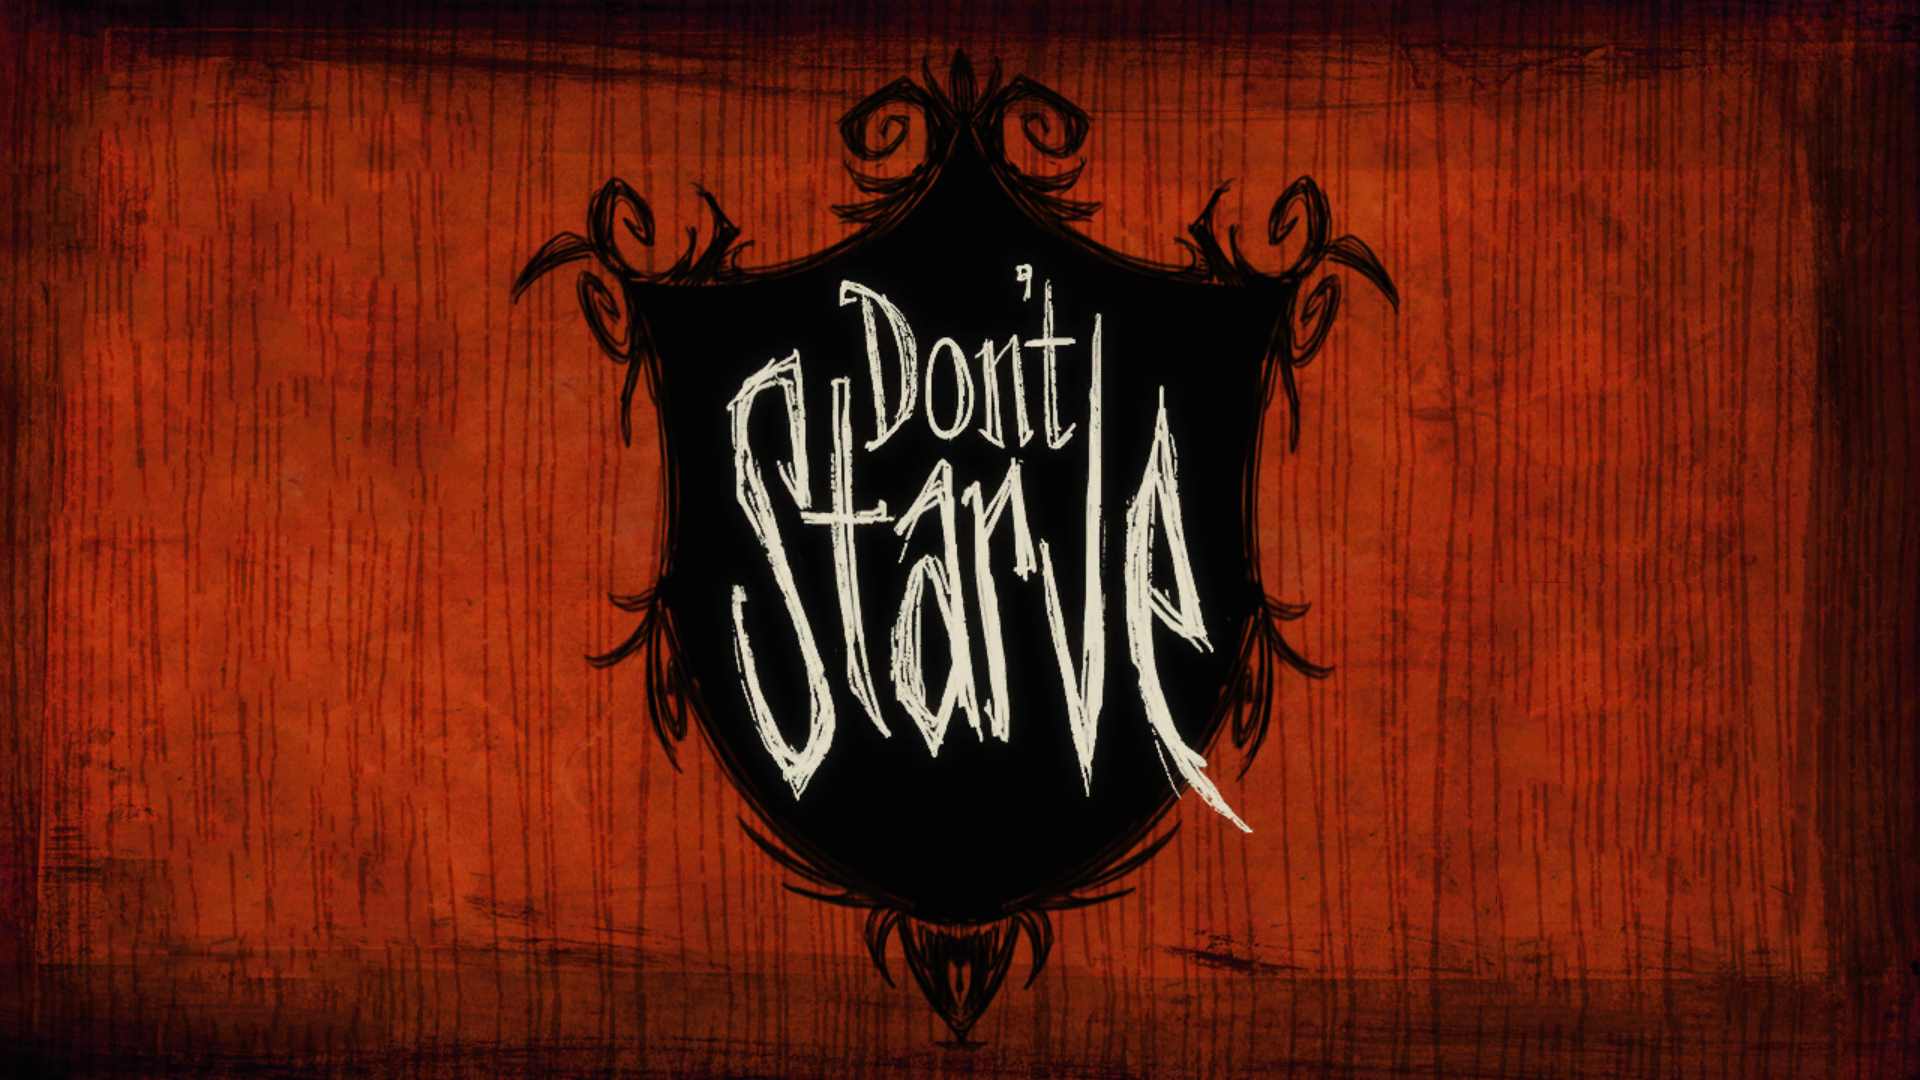 Do not starve steam фото 72